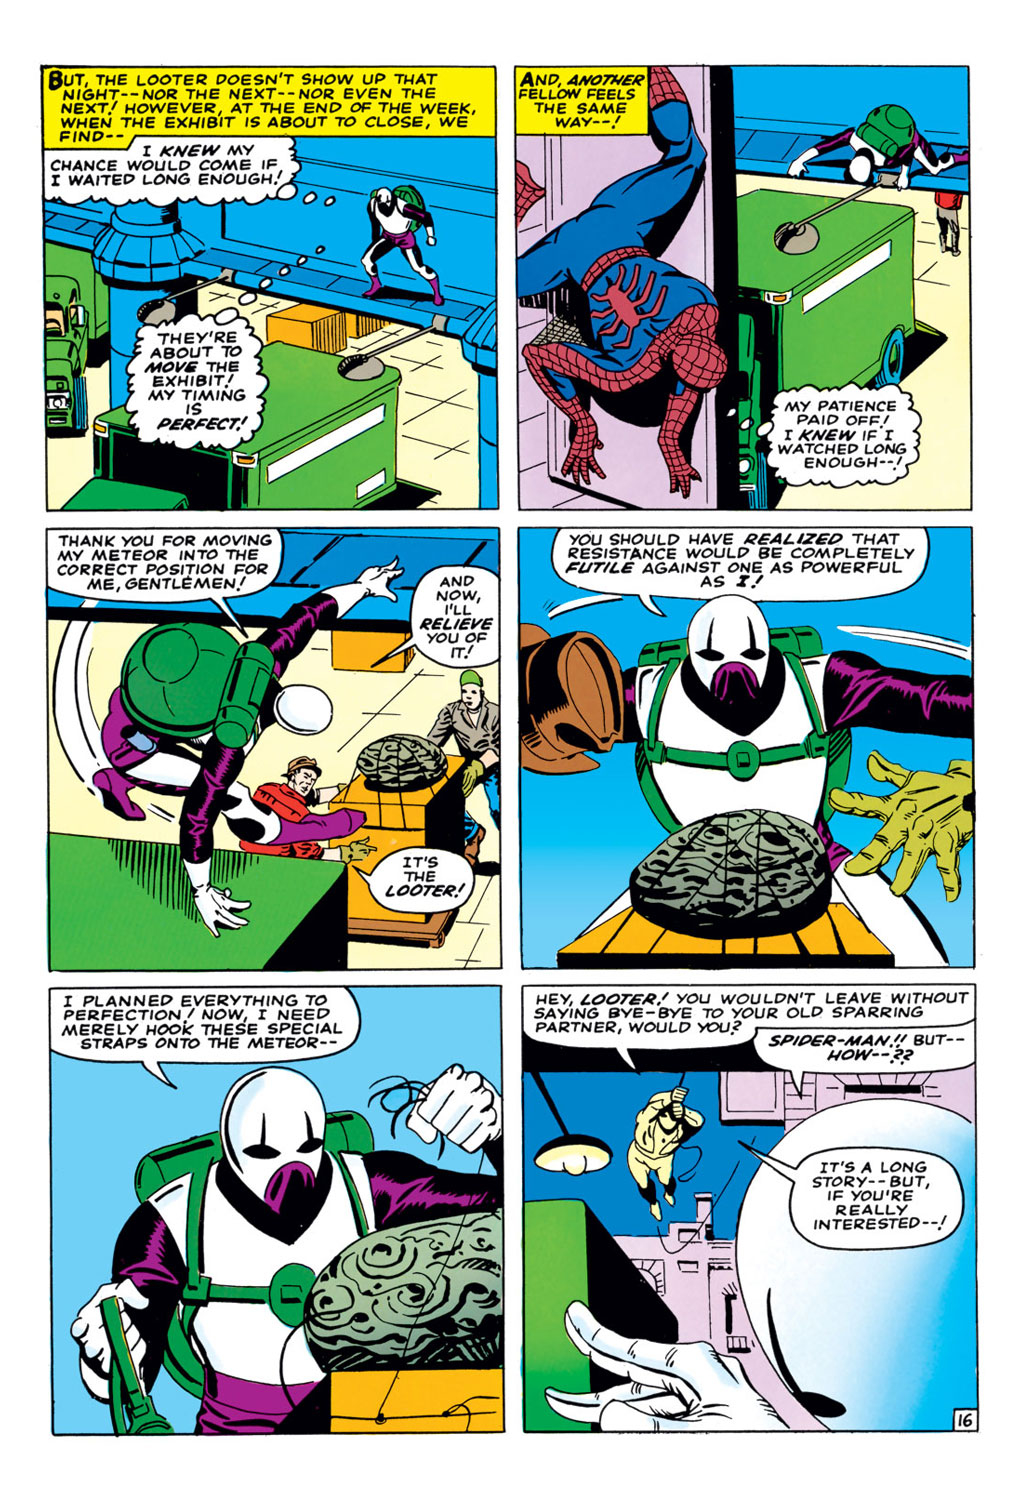 The Amazing Spider-Man (1963) 36 Page 16